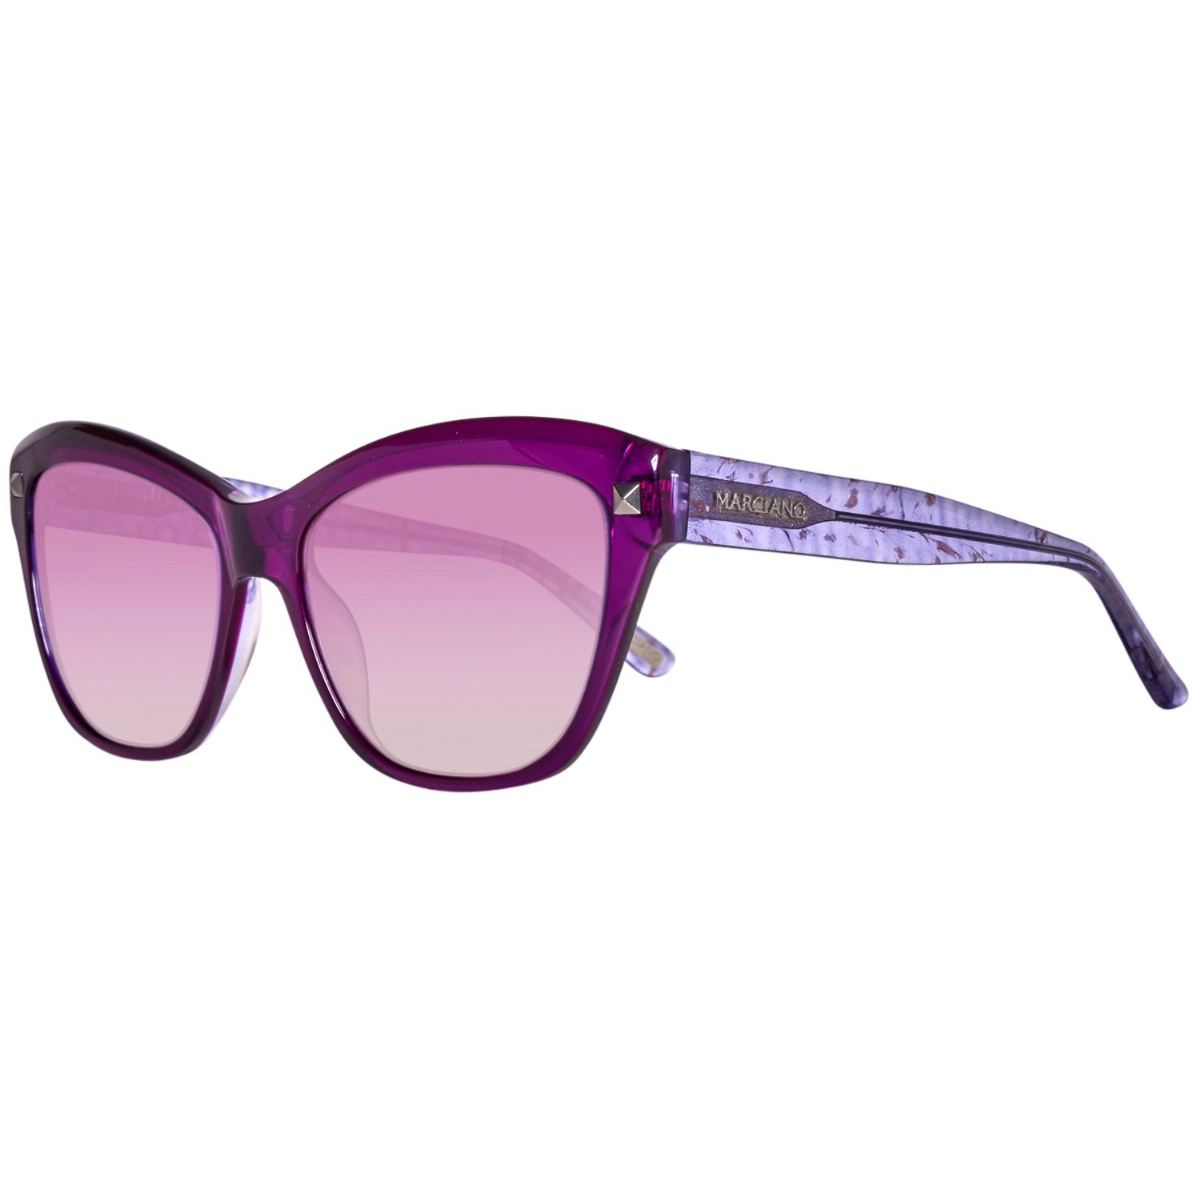 LUNETTES FEMMES GUESS MARCIANO GM0741-5683C